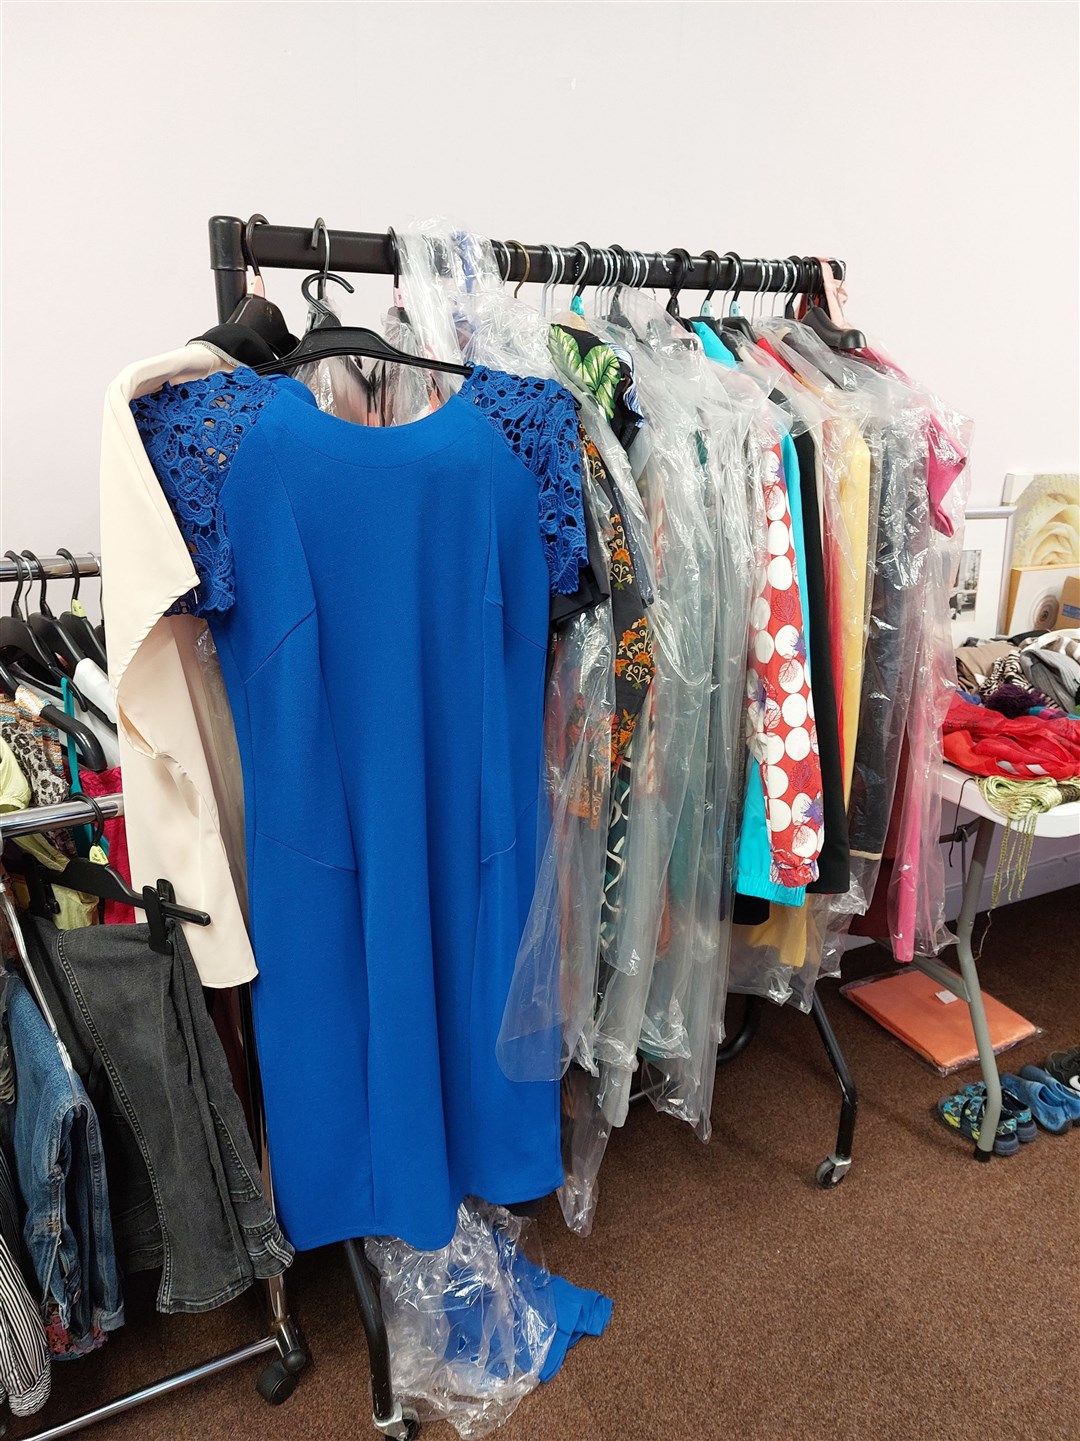 Bargains are there to be found across a variety of different donated items.